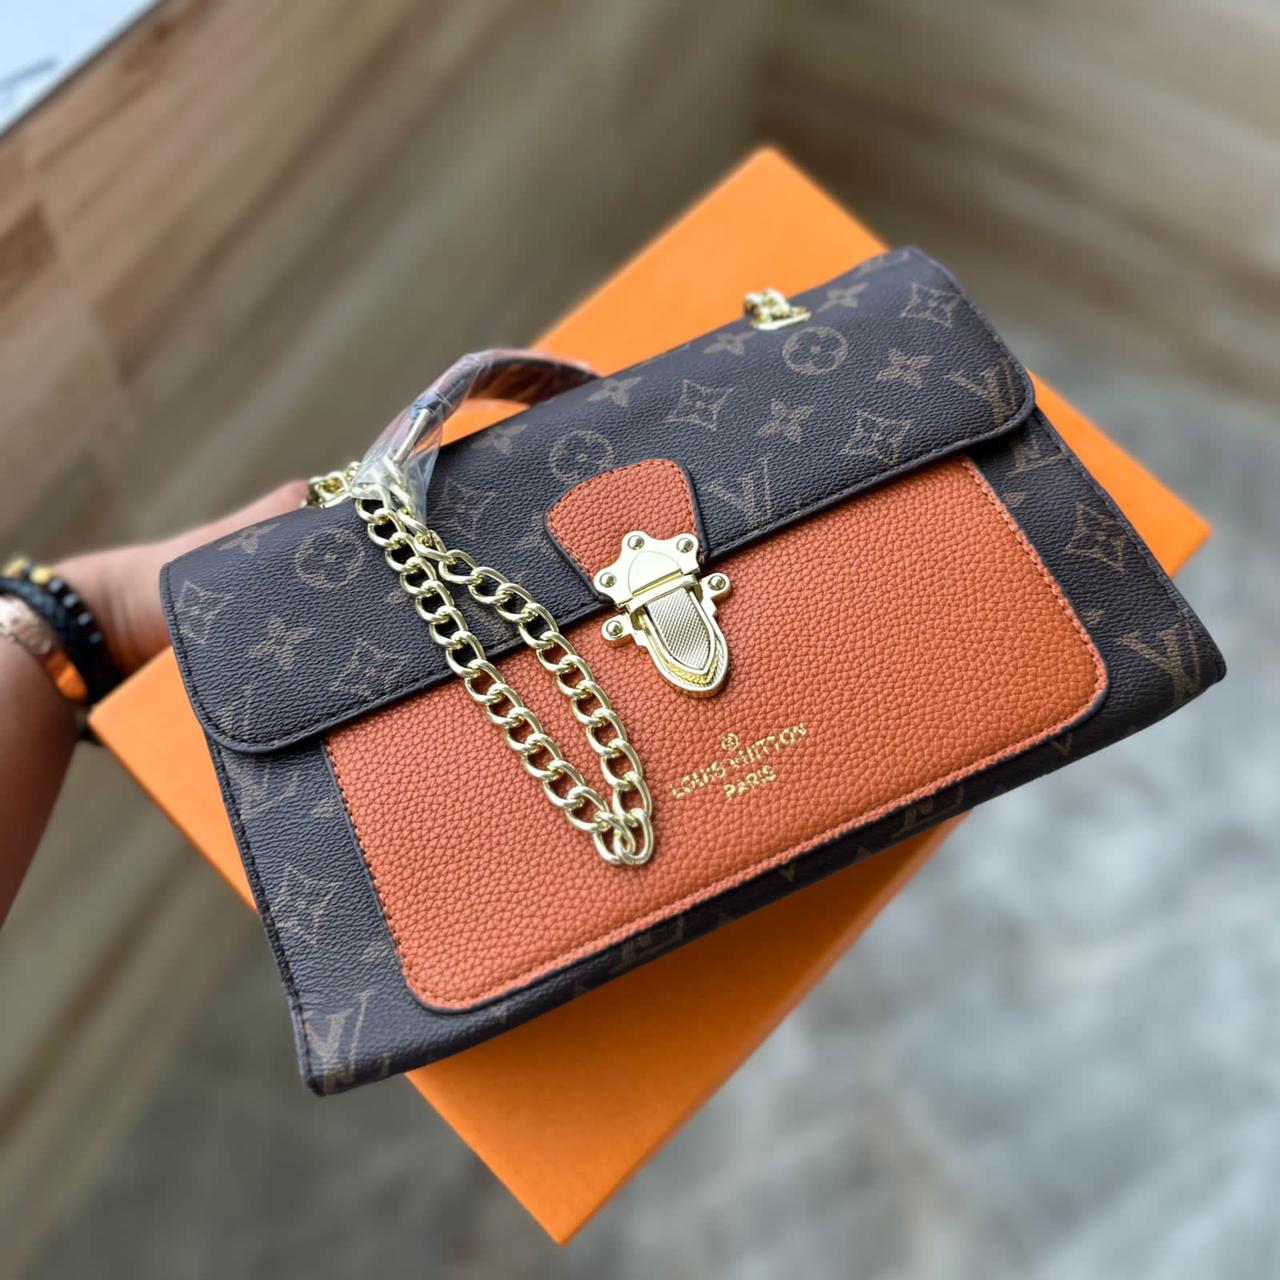 How to spot FAKE louis vuitton handbags - LV Favorite MM Dupe vs Real -  YouTube